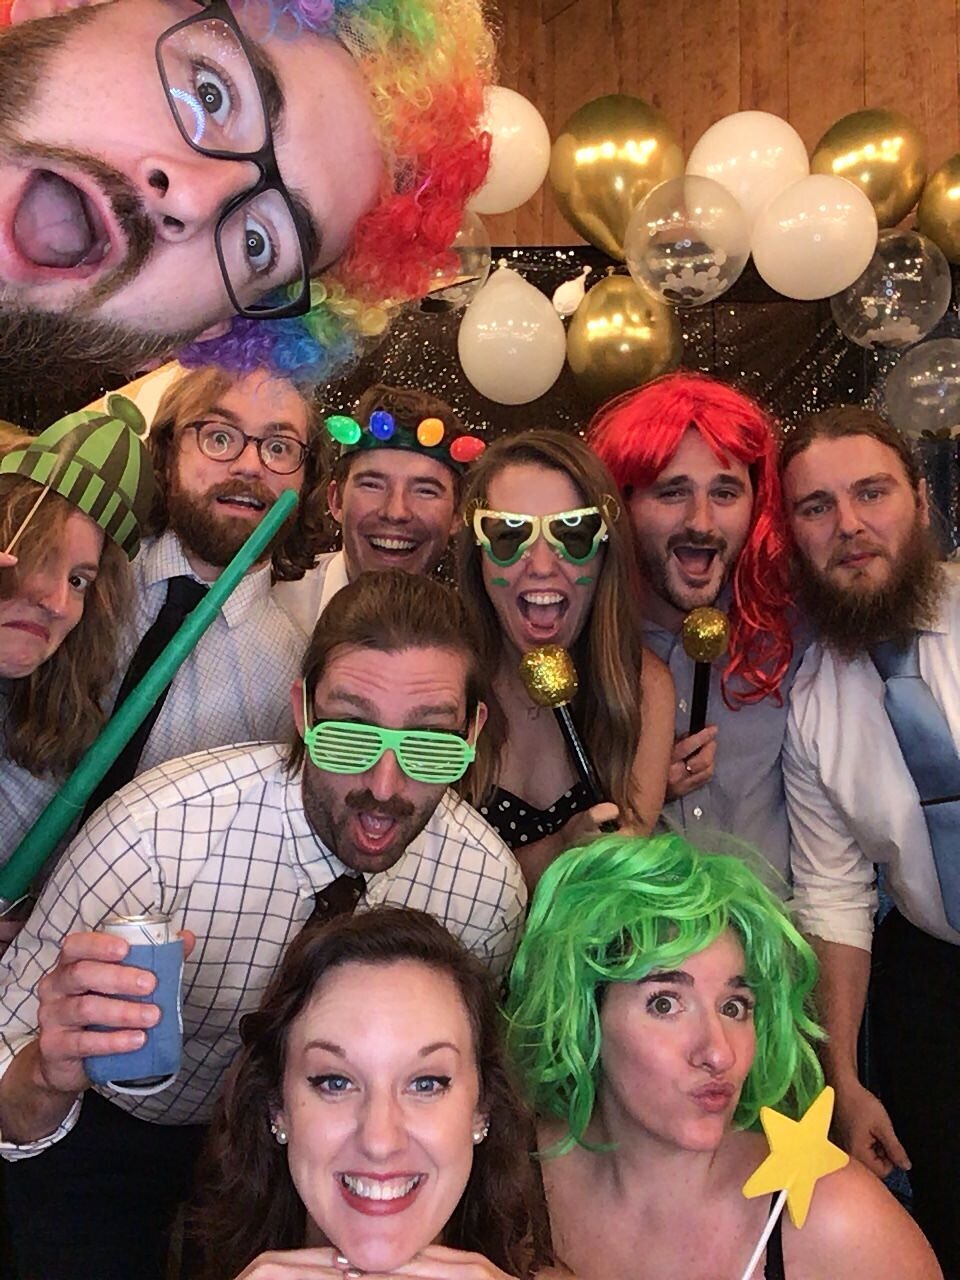 Large group photo of a lot of wedding guests making funny faces and wearing props